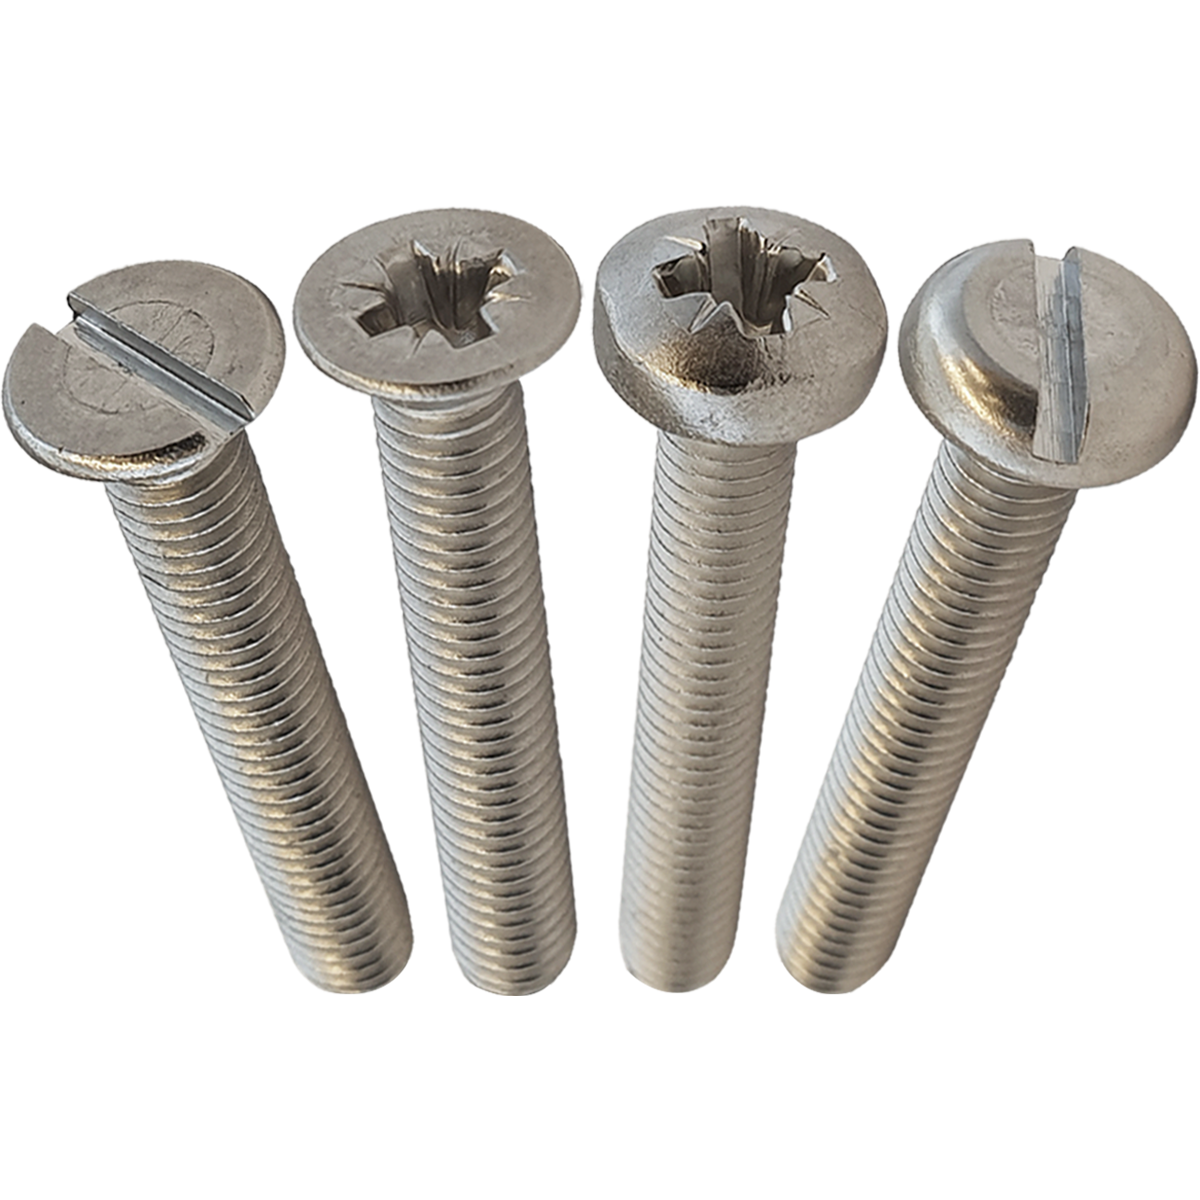 An extensive range of machine screws are available in a variety of diameters, head types, and lengths at competitive prices